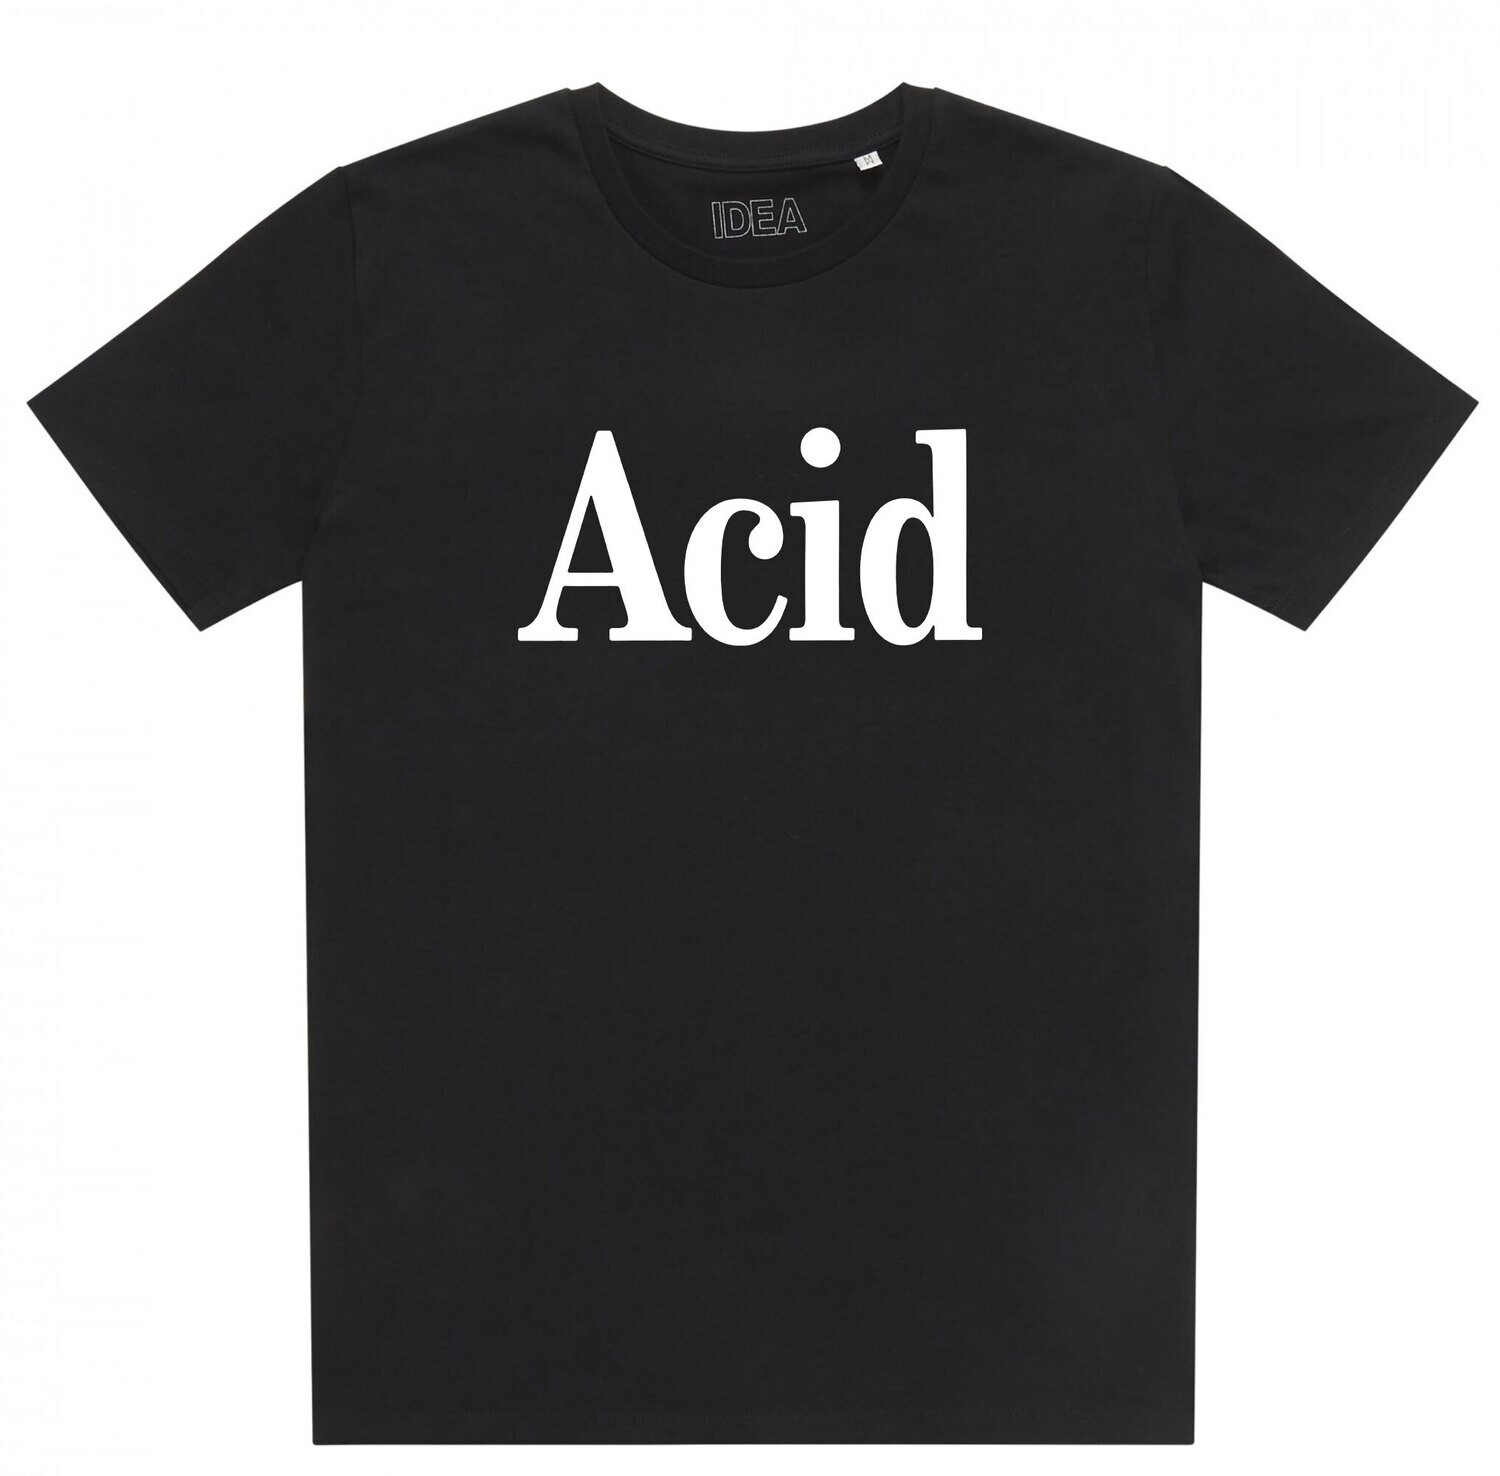 ACID IS THE WORD T-Shirt